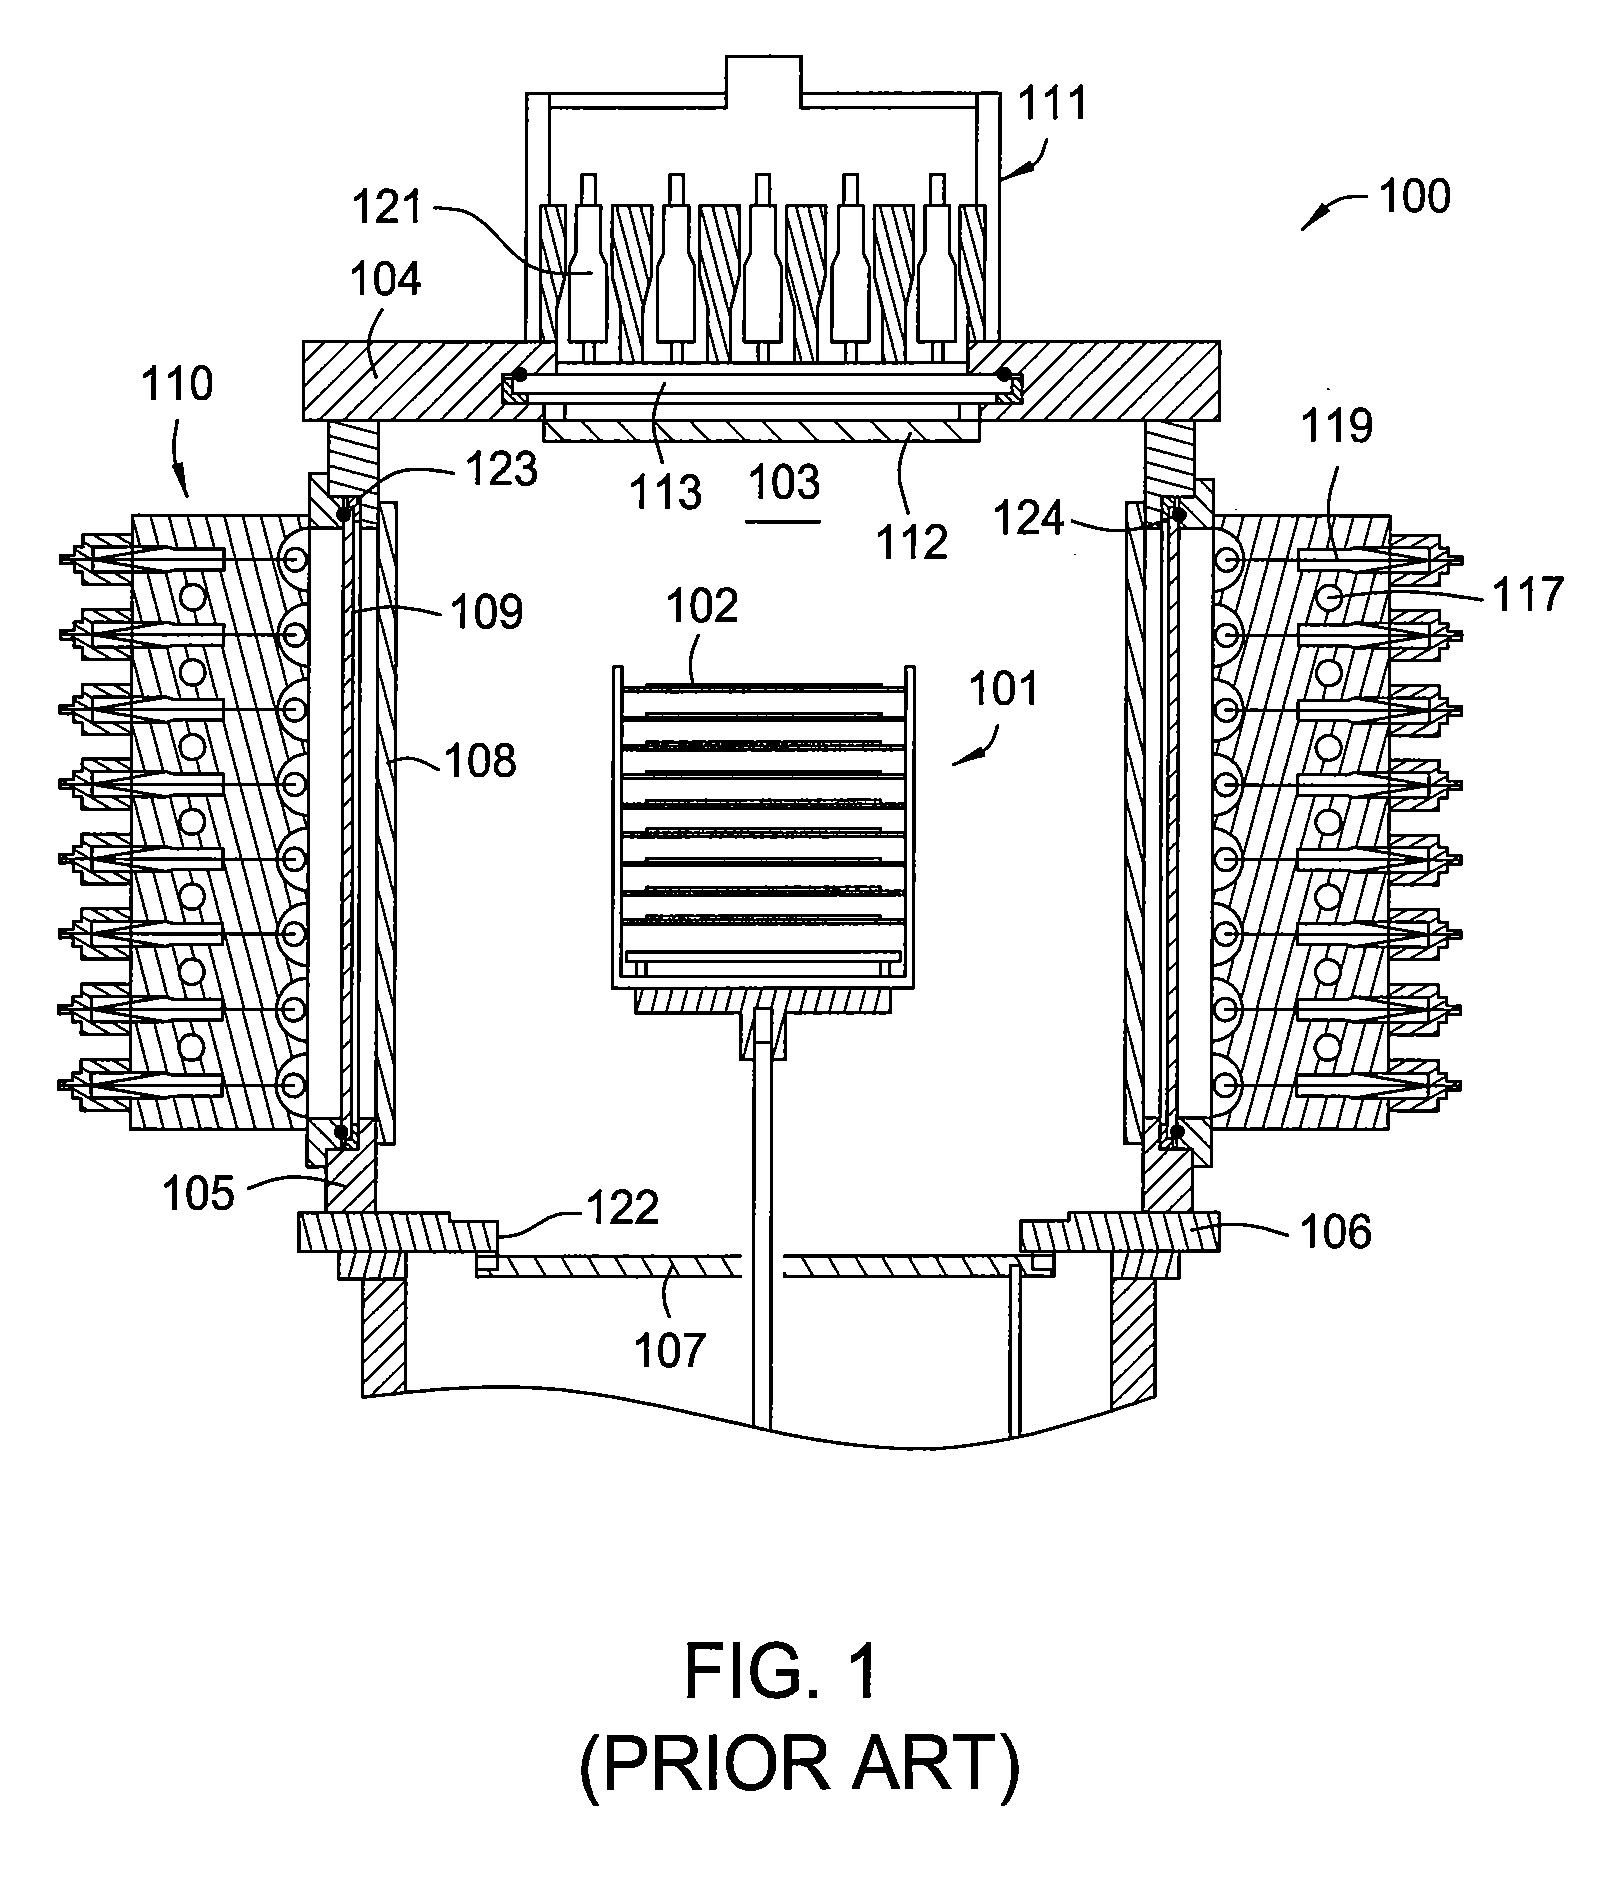 Batch processing chamber with diffuser plate and injector assembly